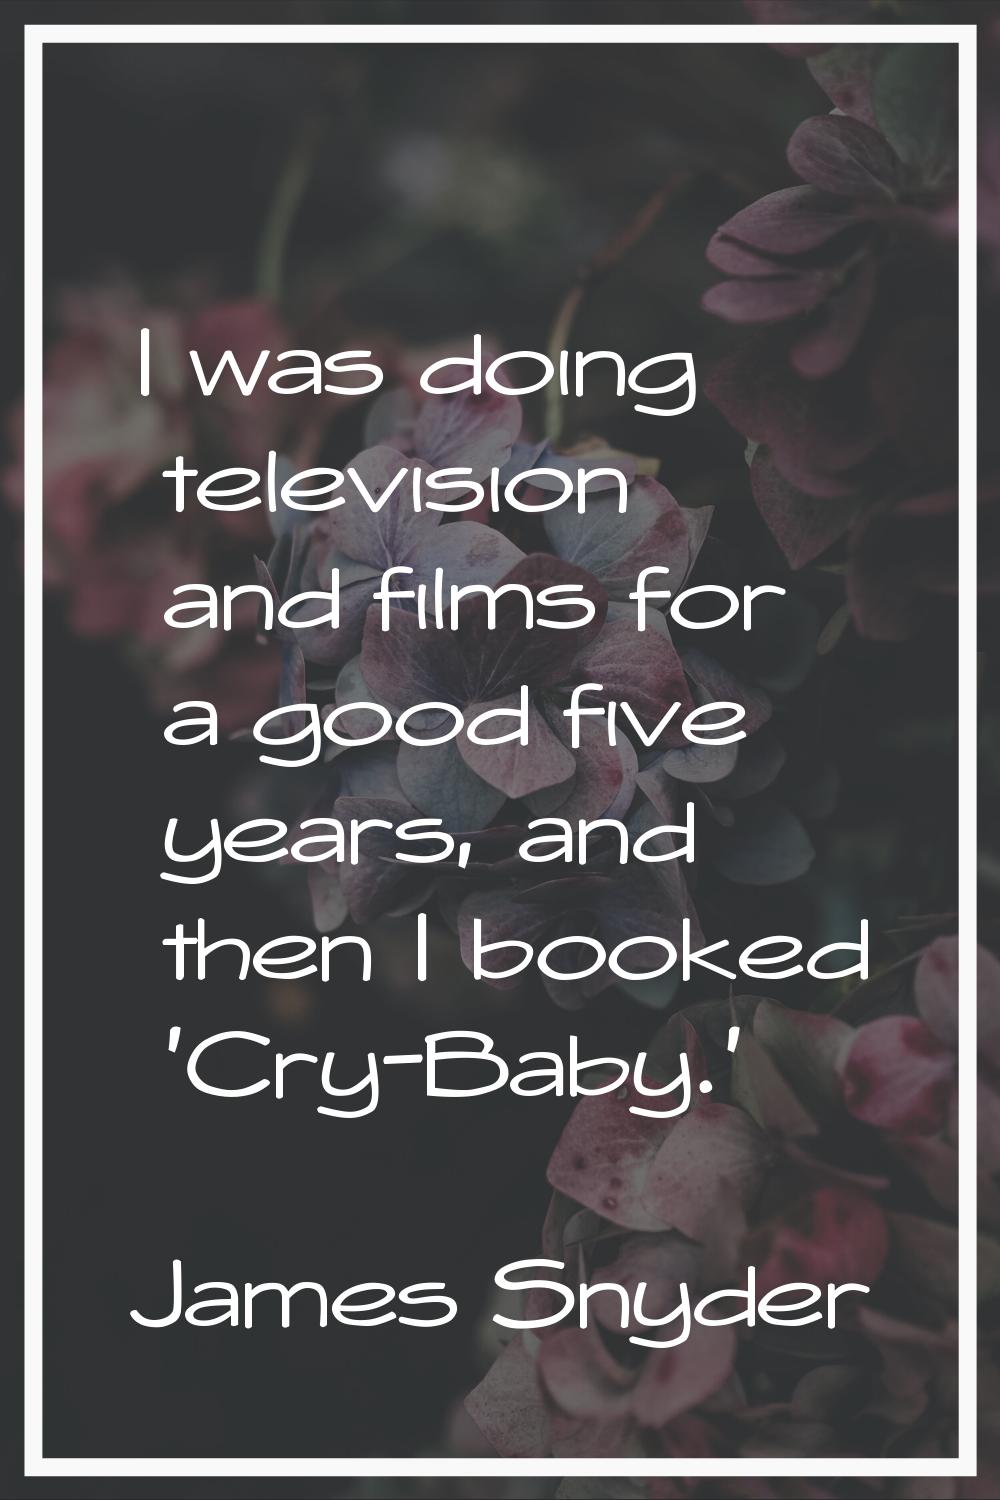 I was doing television and films for a good five years, and then I booked 'Cry-Baby.'